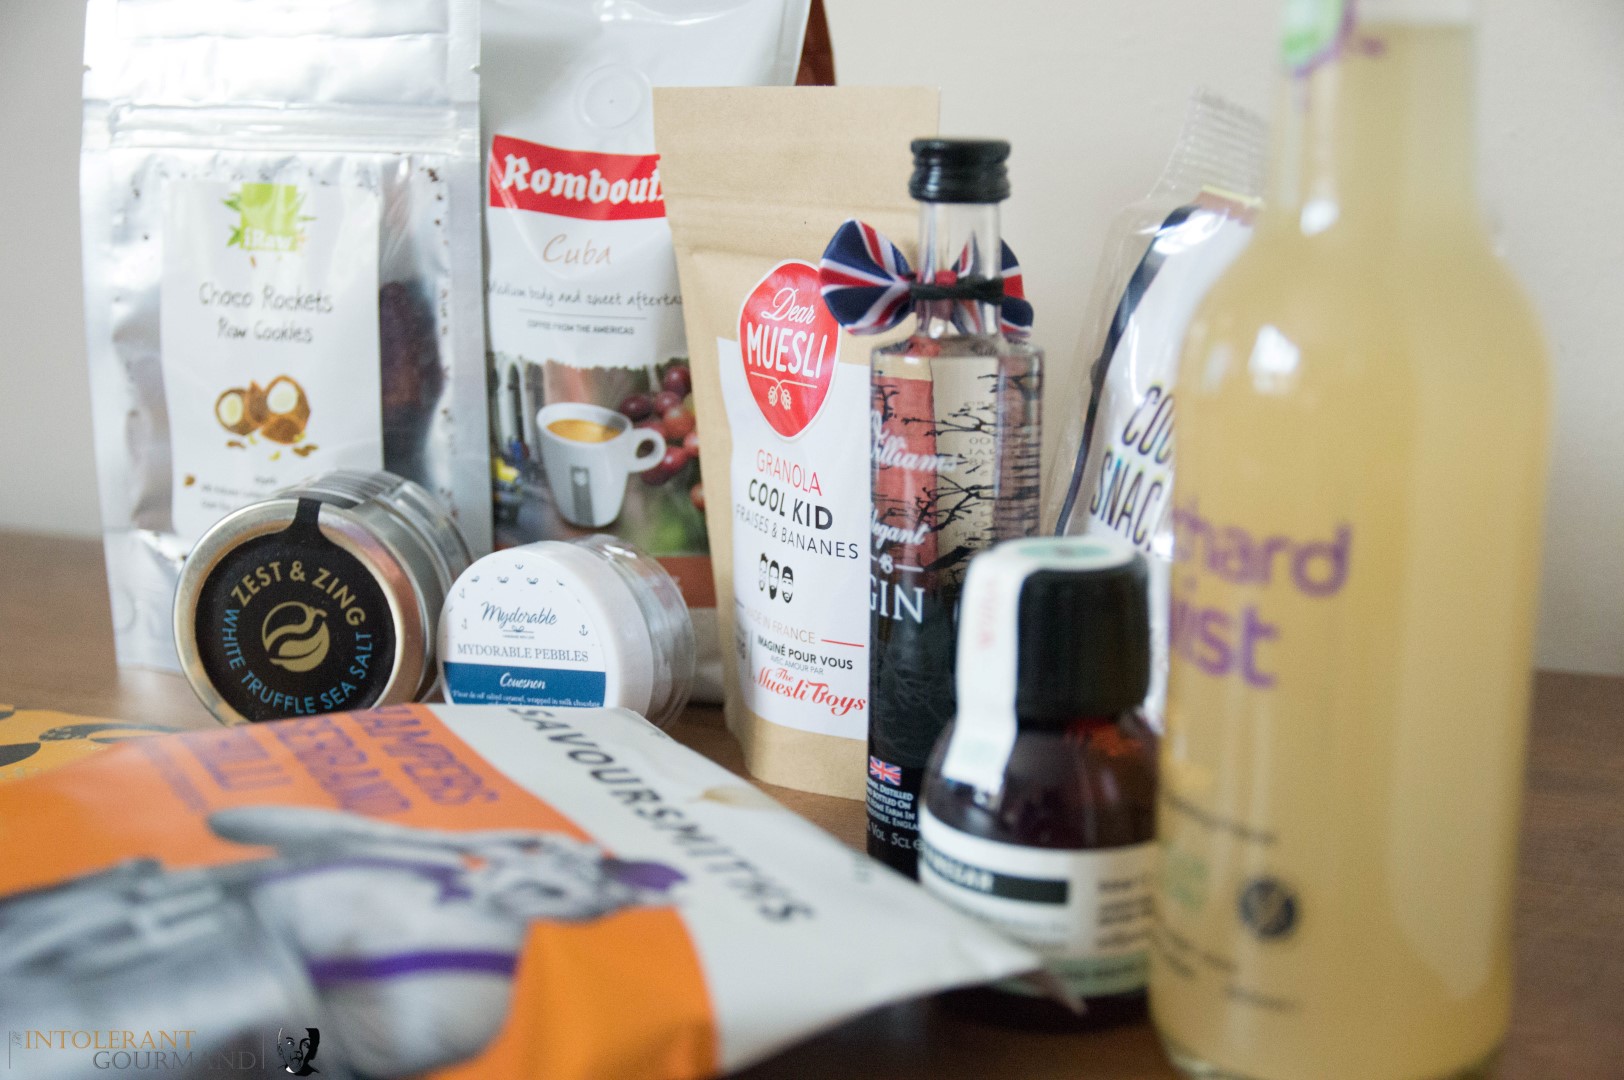 Speciality Fine Food Giveaway - a selection of stunning food and drink products, including gin, chocolate, truffle salt, coffee, granola and more! All of these items were featured at the Speciality & Fine Food Fair 2017! We're giving you the chance to try them yourself! www.intolerantgourmand.com